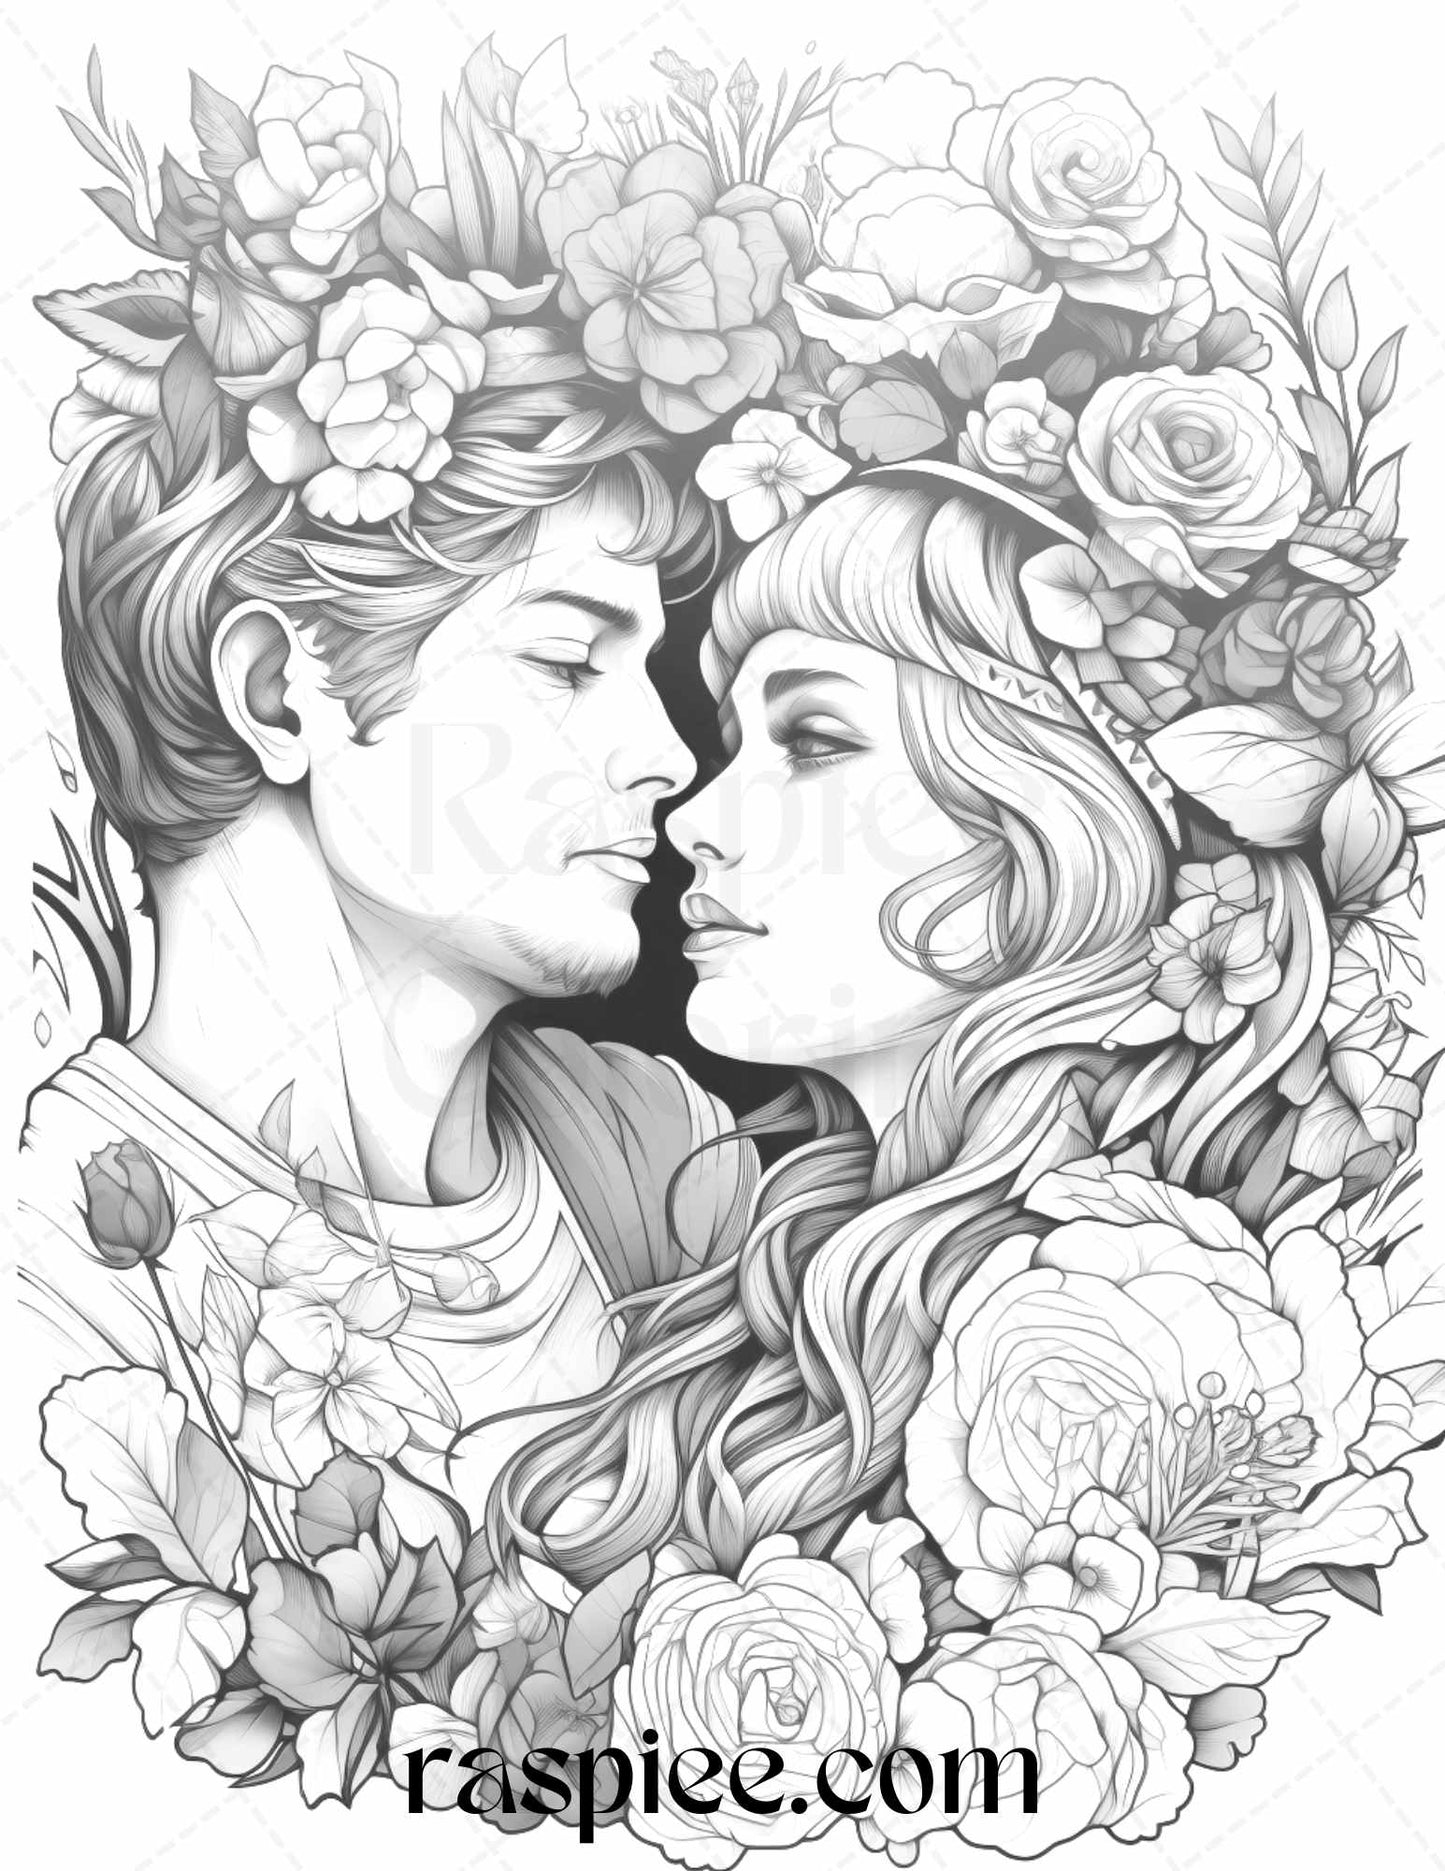 50 Romantic Couple Flowers Grayscale Coloring Pages Printable for Adults, PDF File Instant Download - Raspiee Coloring